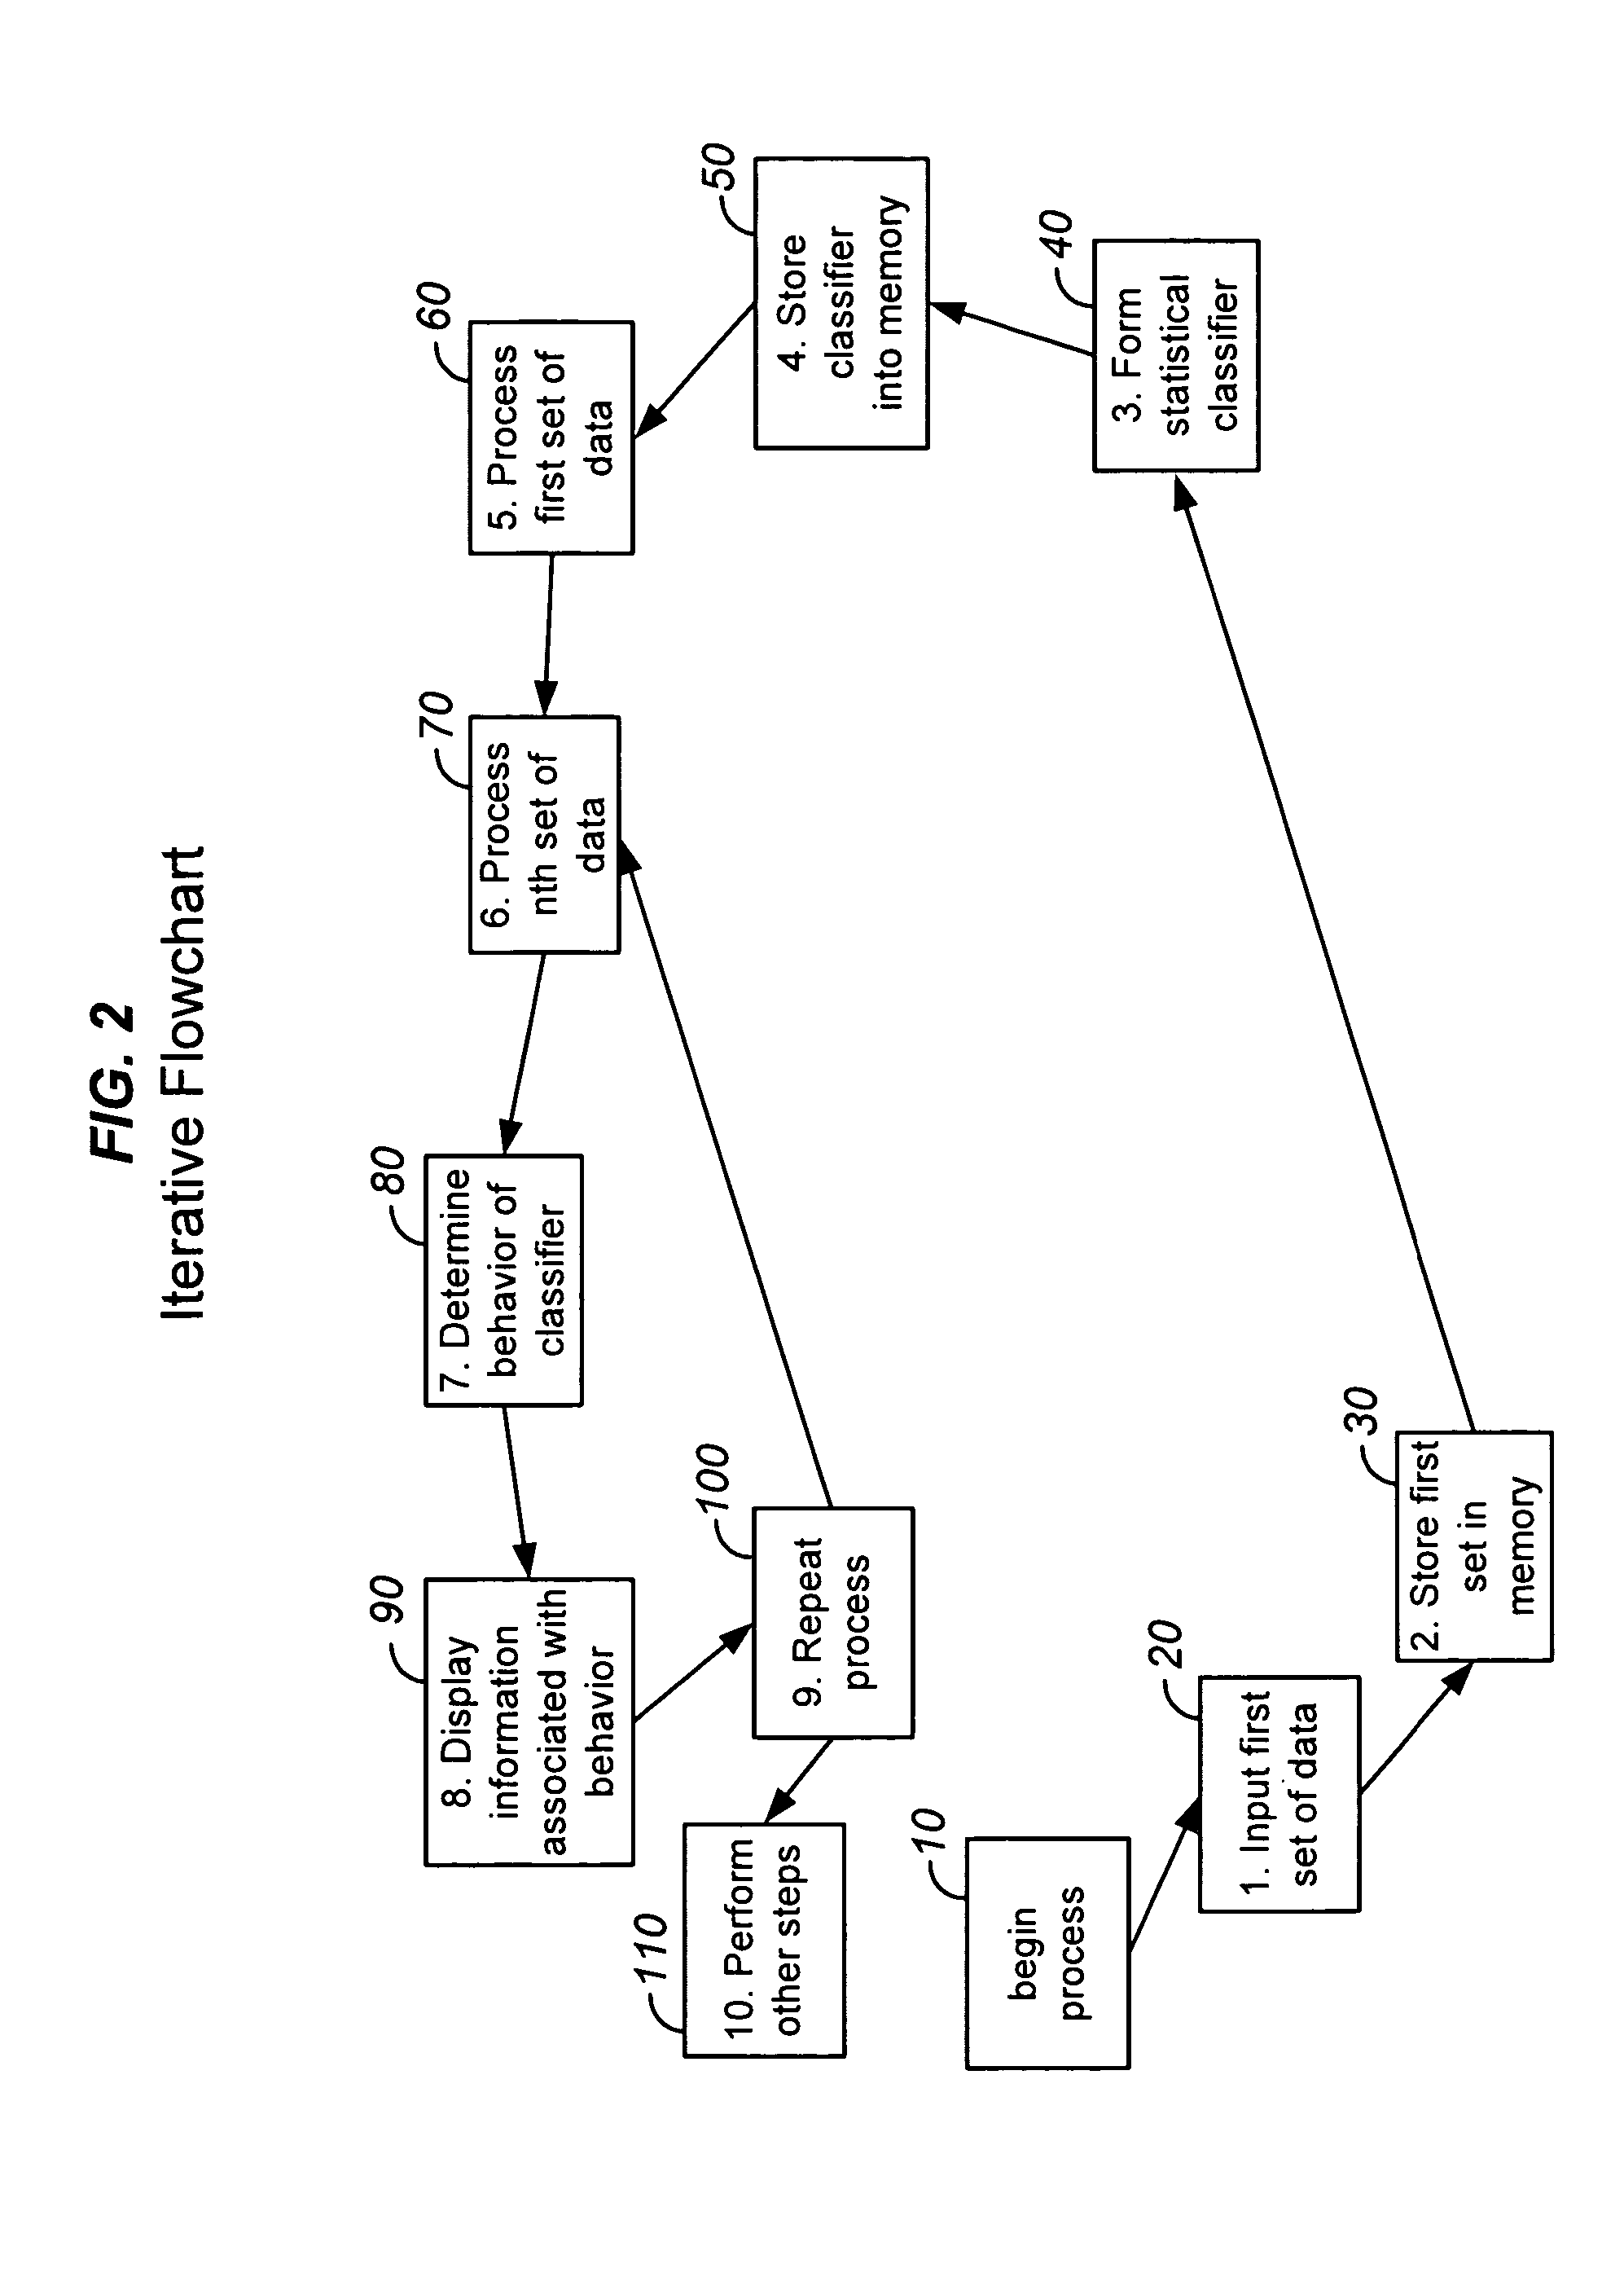 System and method for determining a behavior of a classifier for use with business data